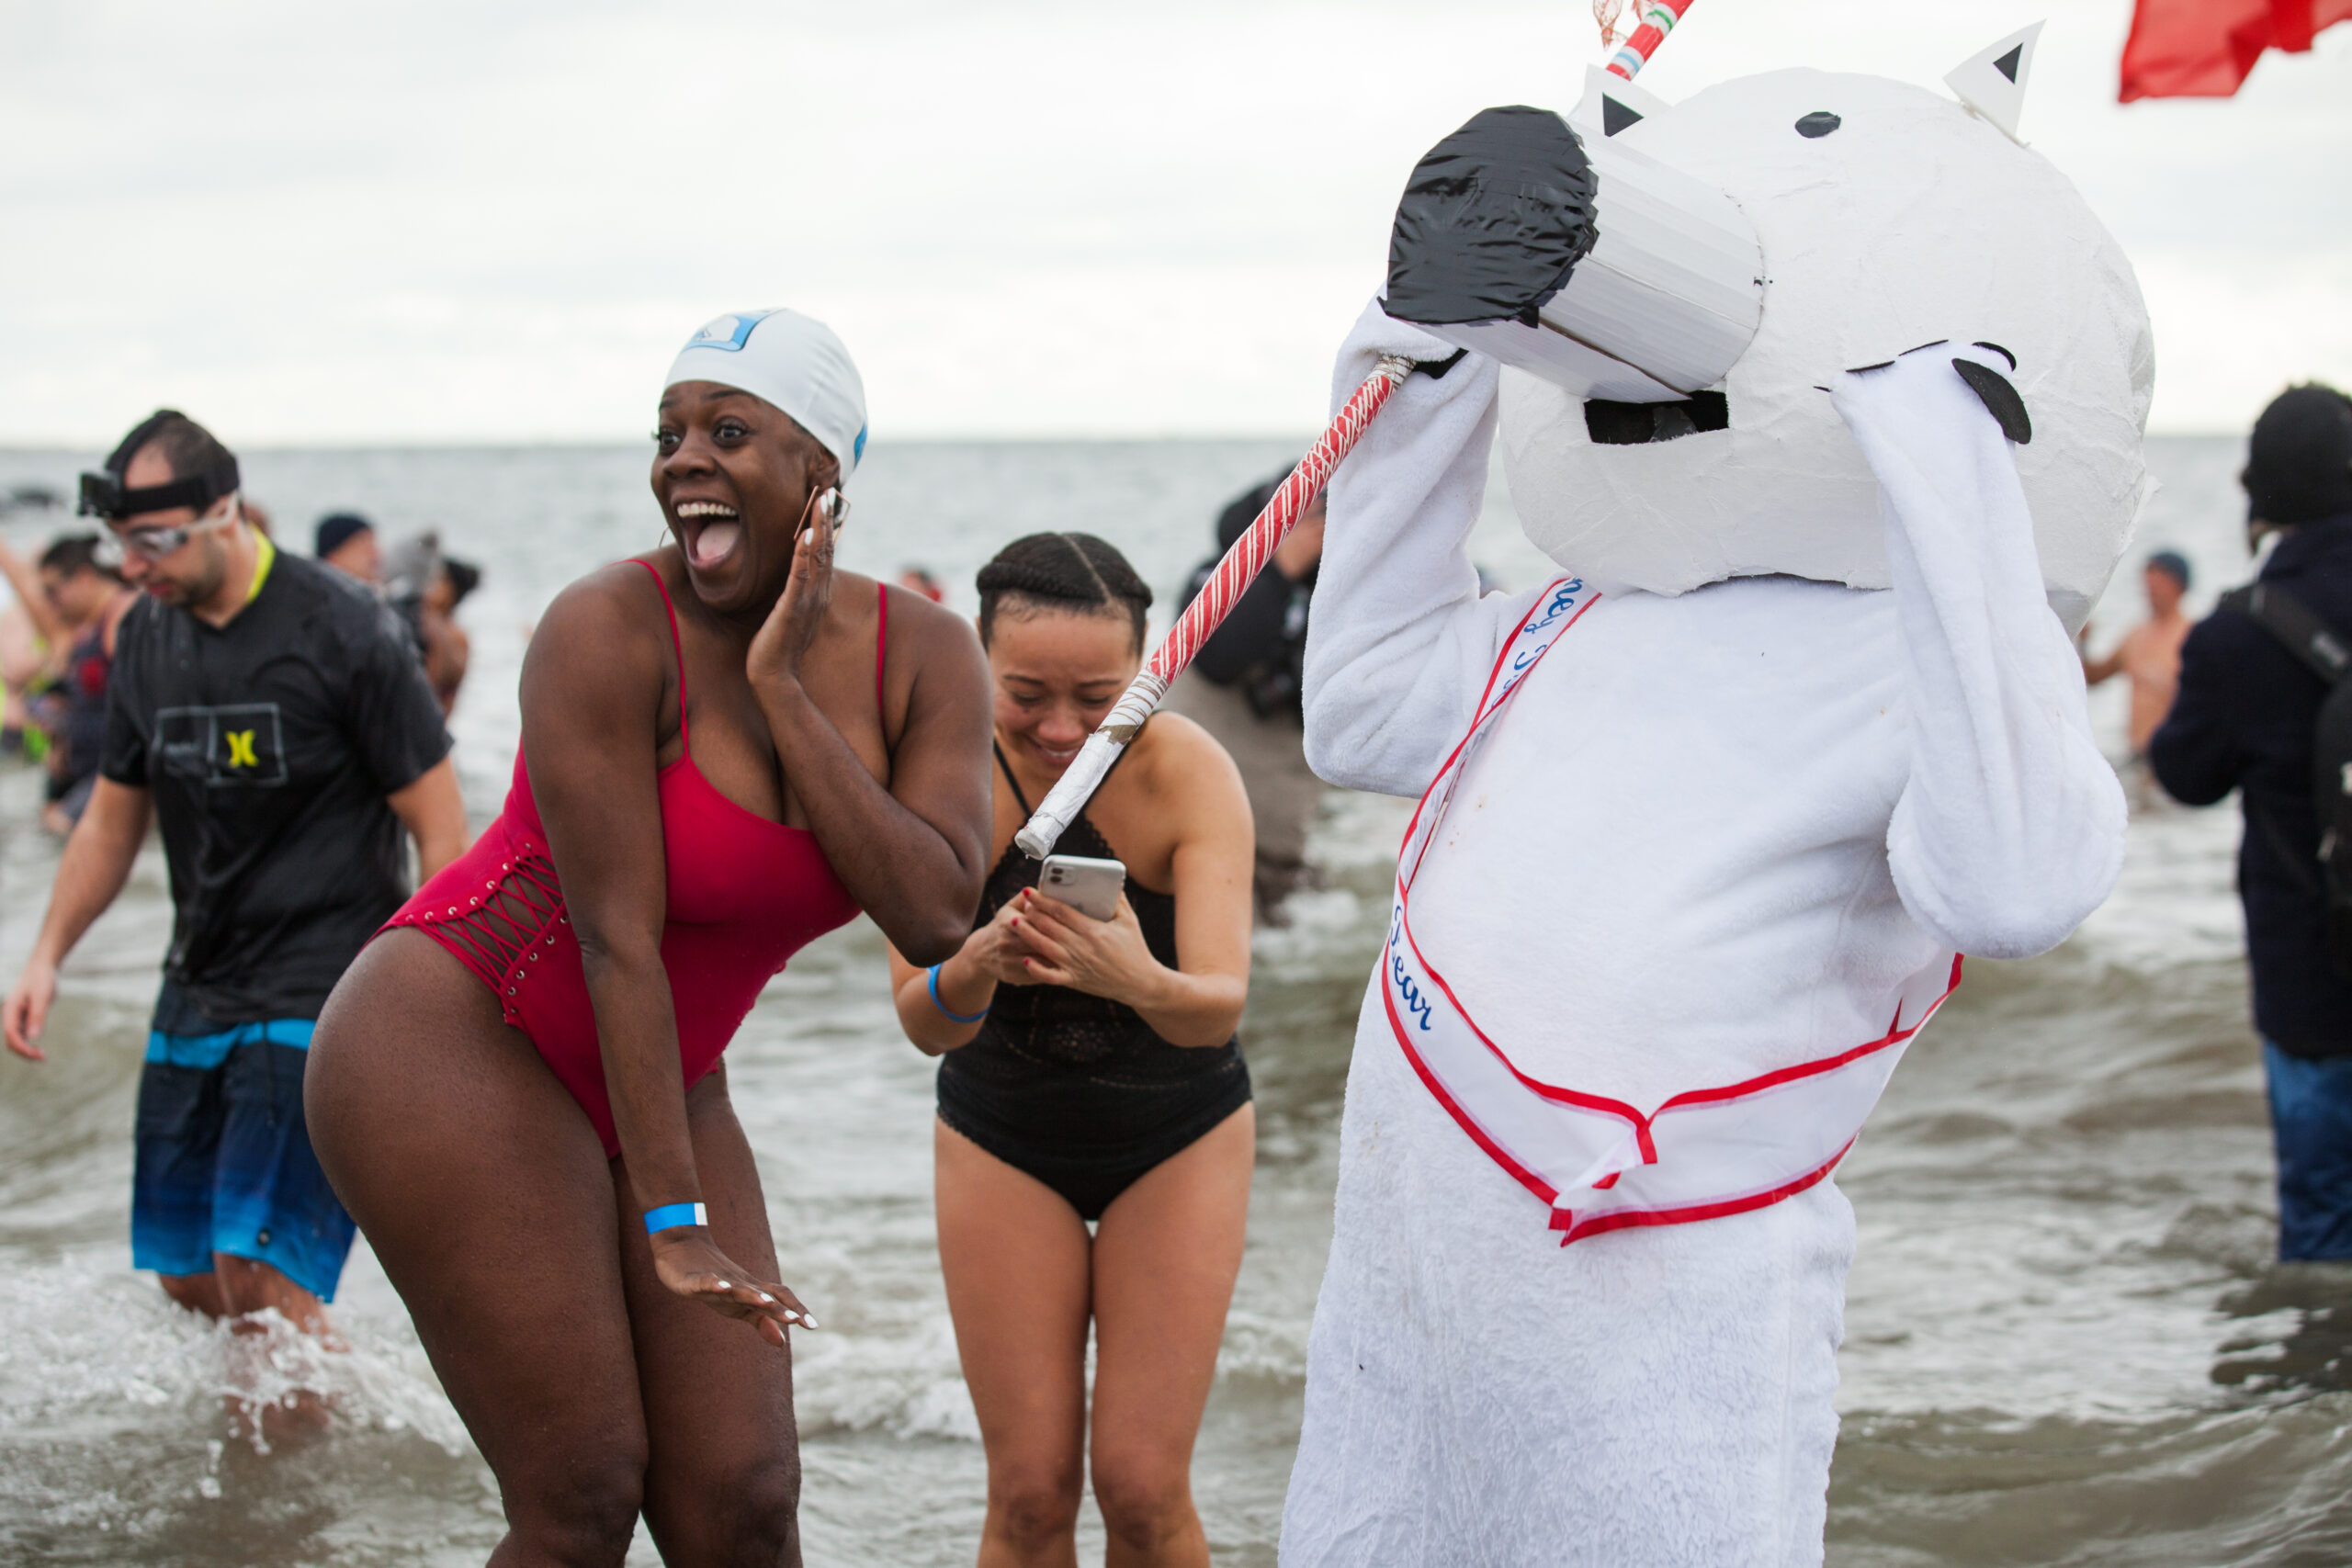 The unusual cartoon-like character at right paid a visit to the Plunge in 2020.Photo by Paul Frangipane/Brooklyn Eagle